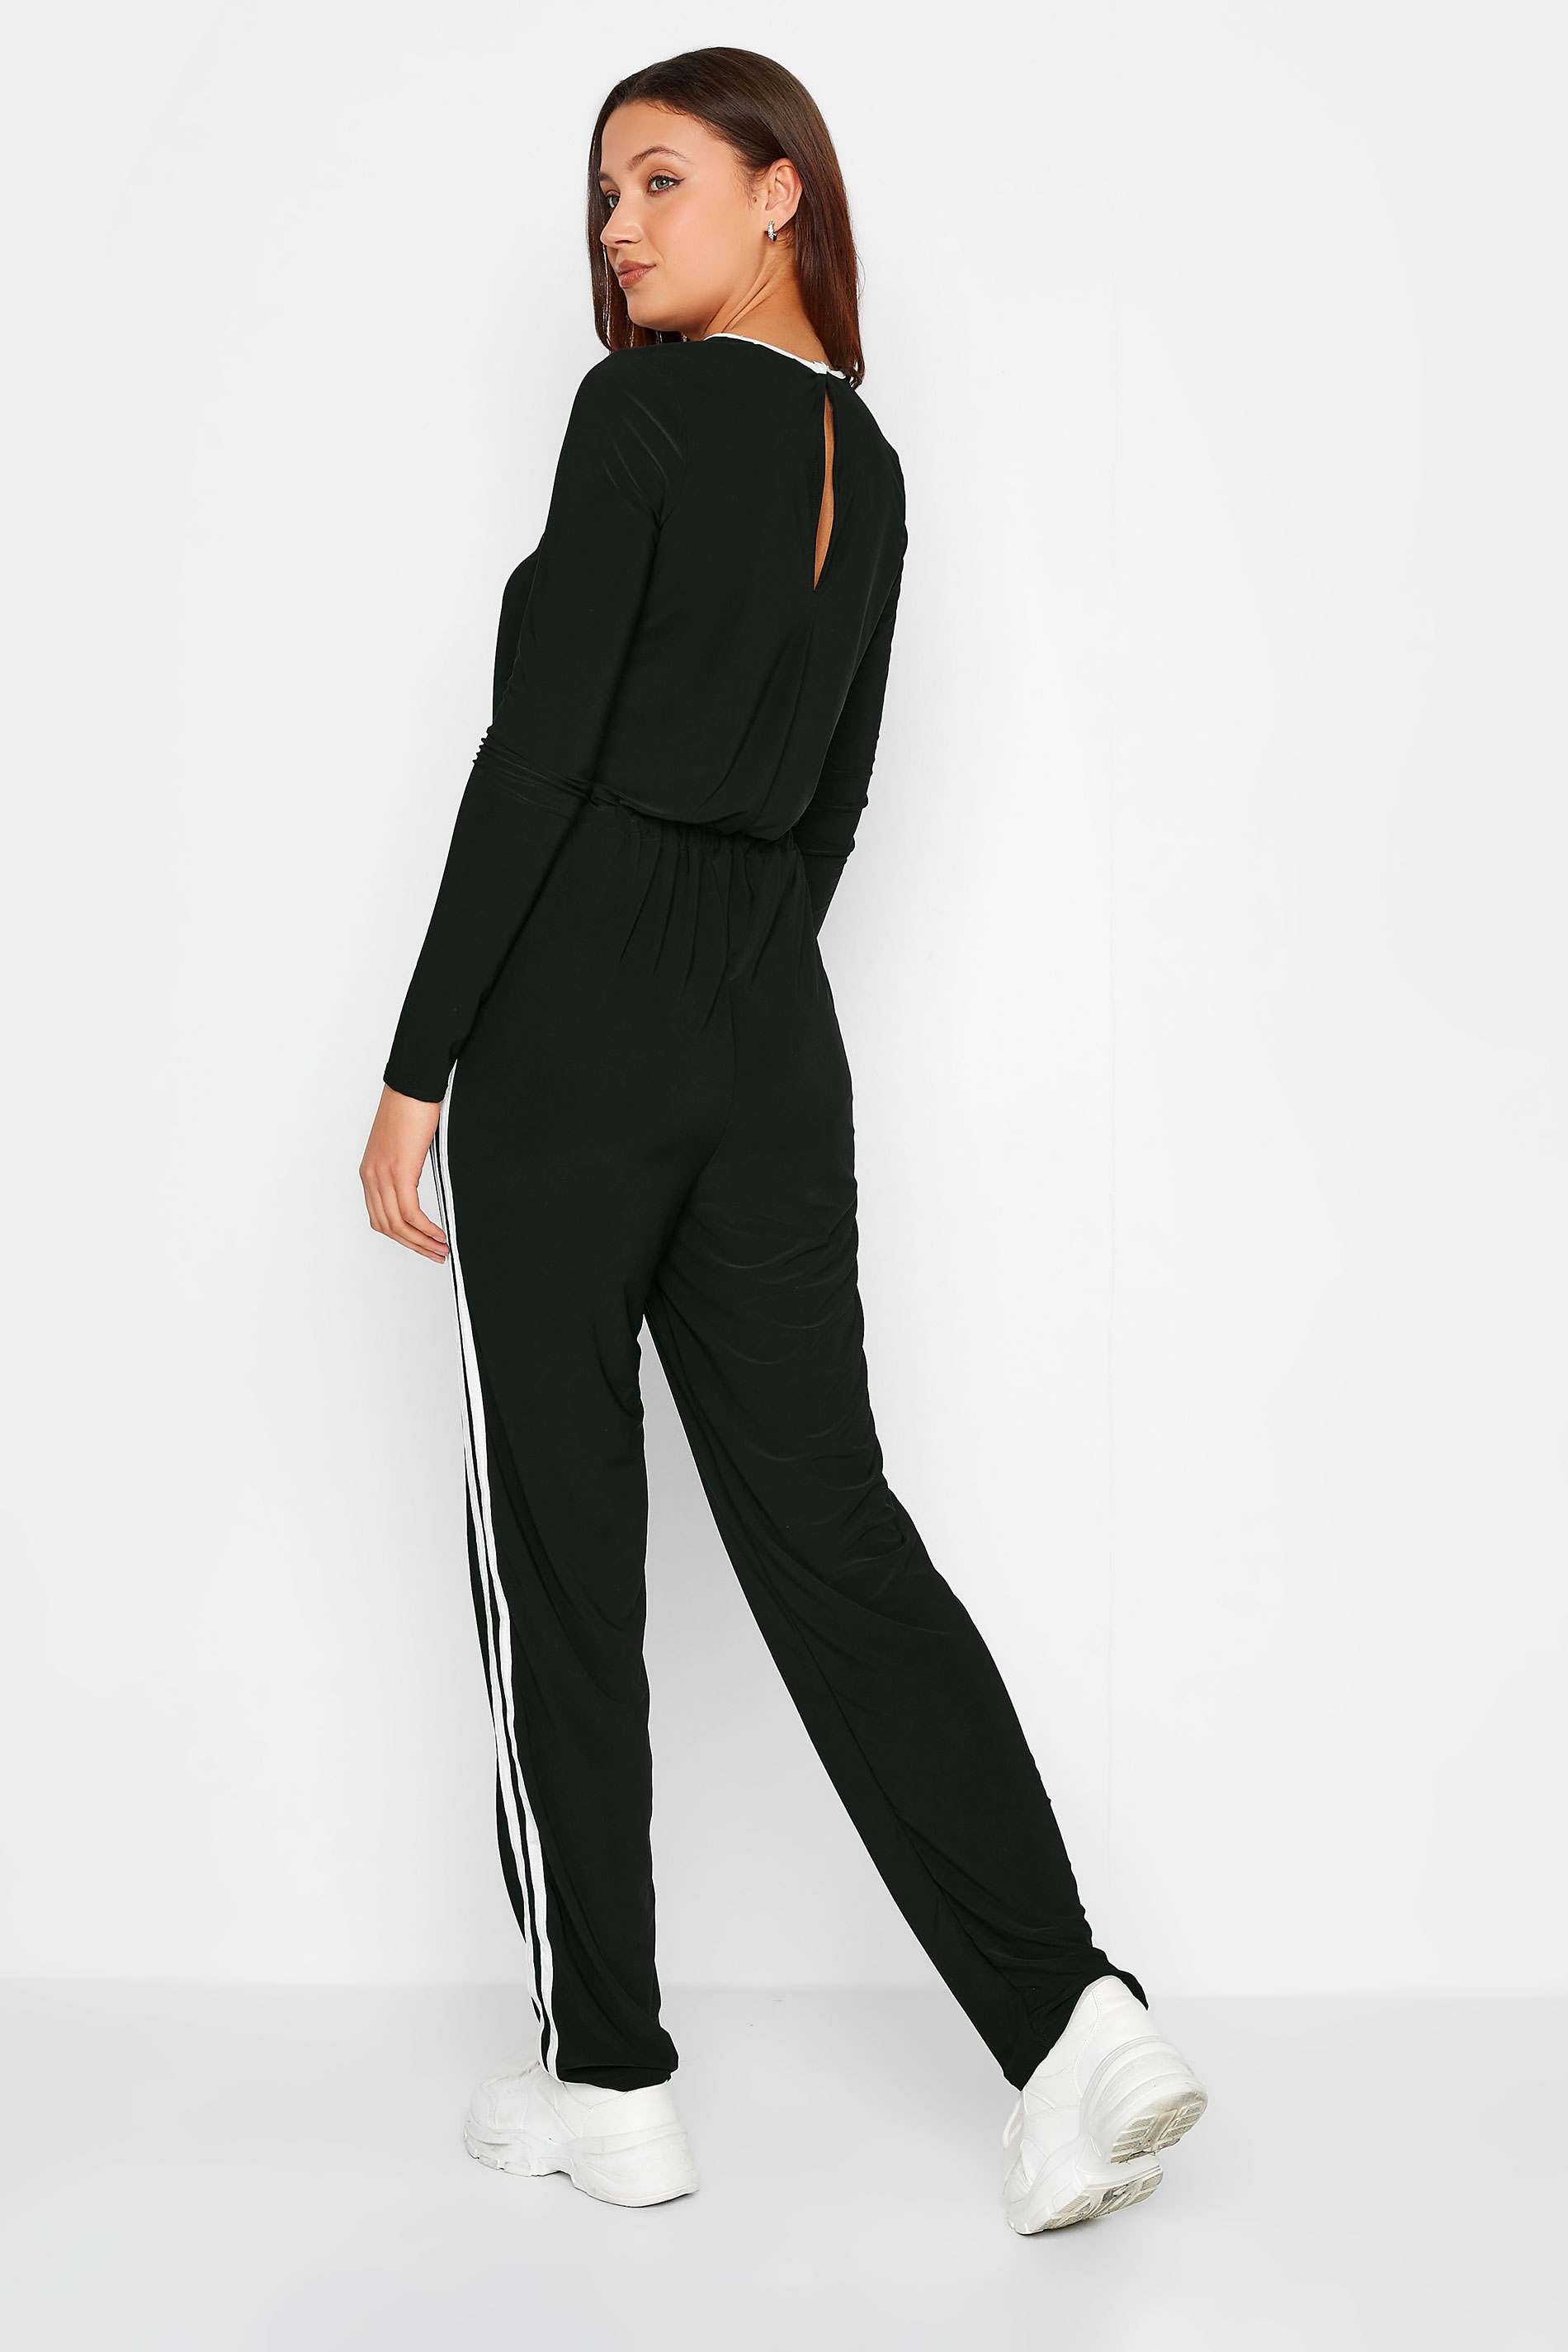 LTS Tall Women's Black Side Stripe Jumpsuit | Yours Clothing 3